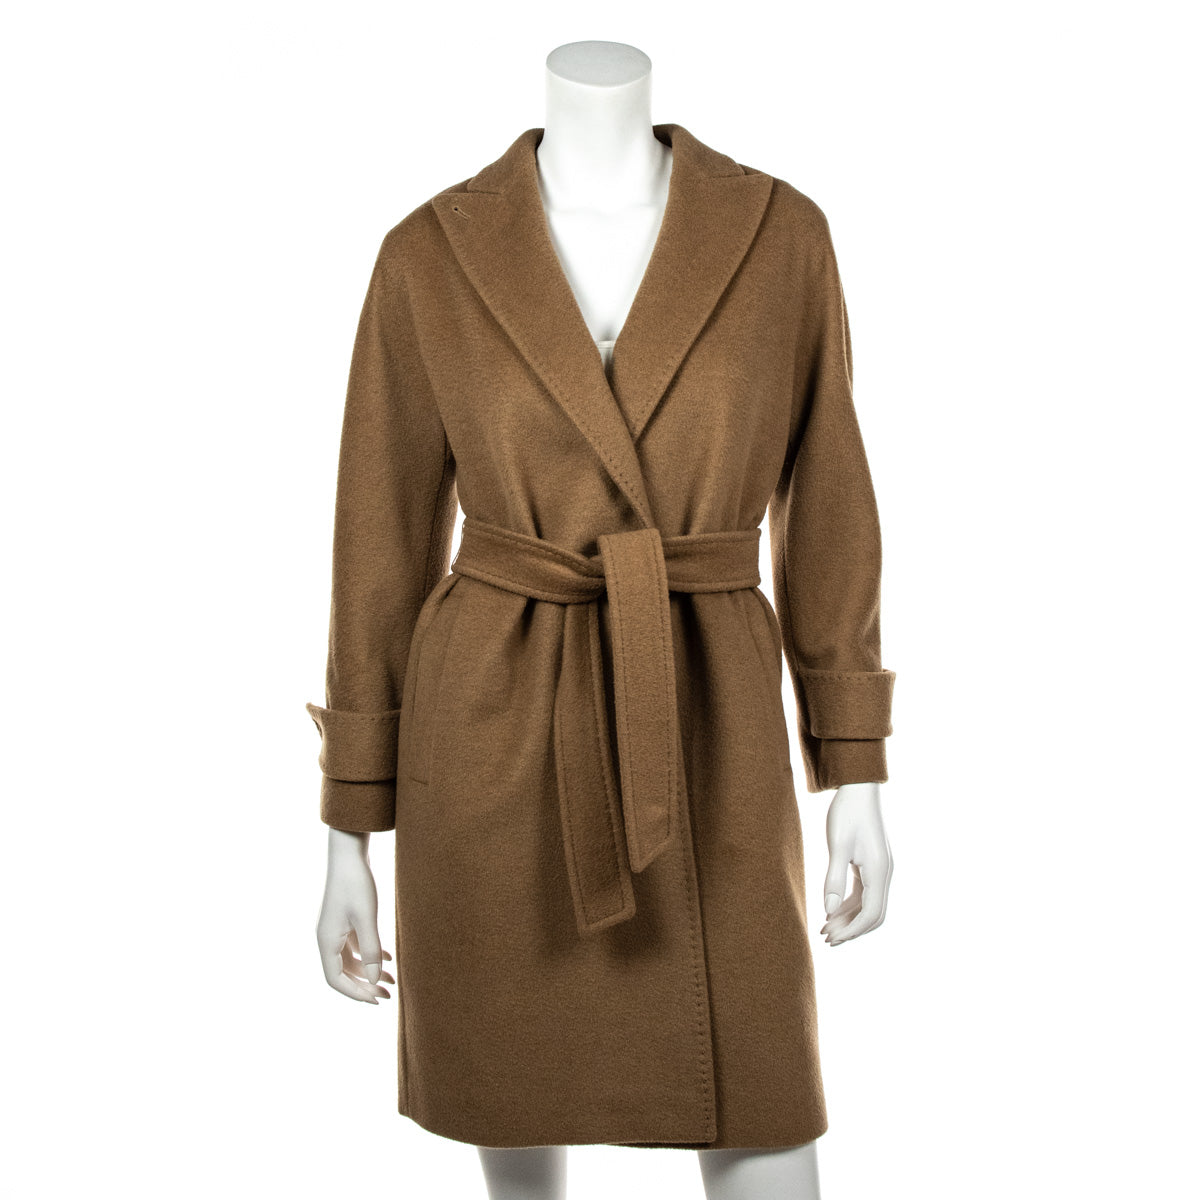 Max Mara Tan Camel Hair Belted Coat Size XXS | IT 36 - Love that Bag etc - Preowned Authentic Designer Handbags & Preloved Fashions